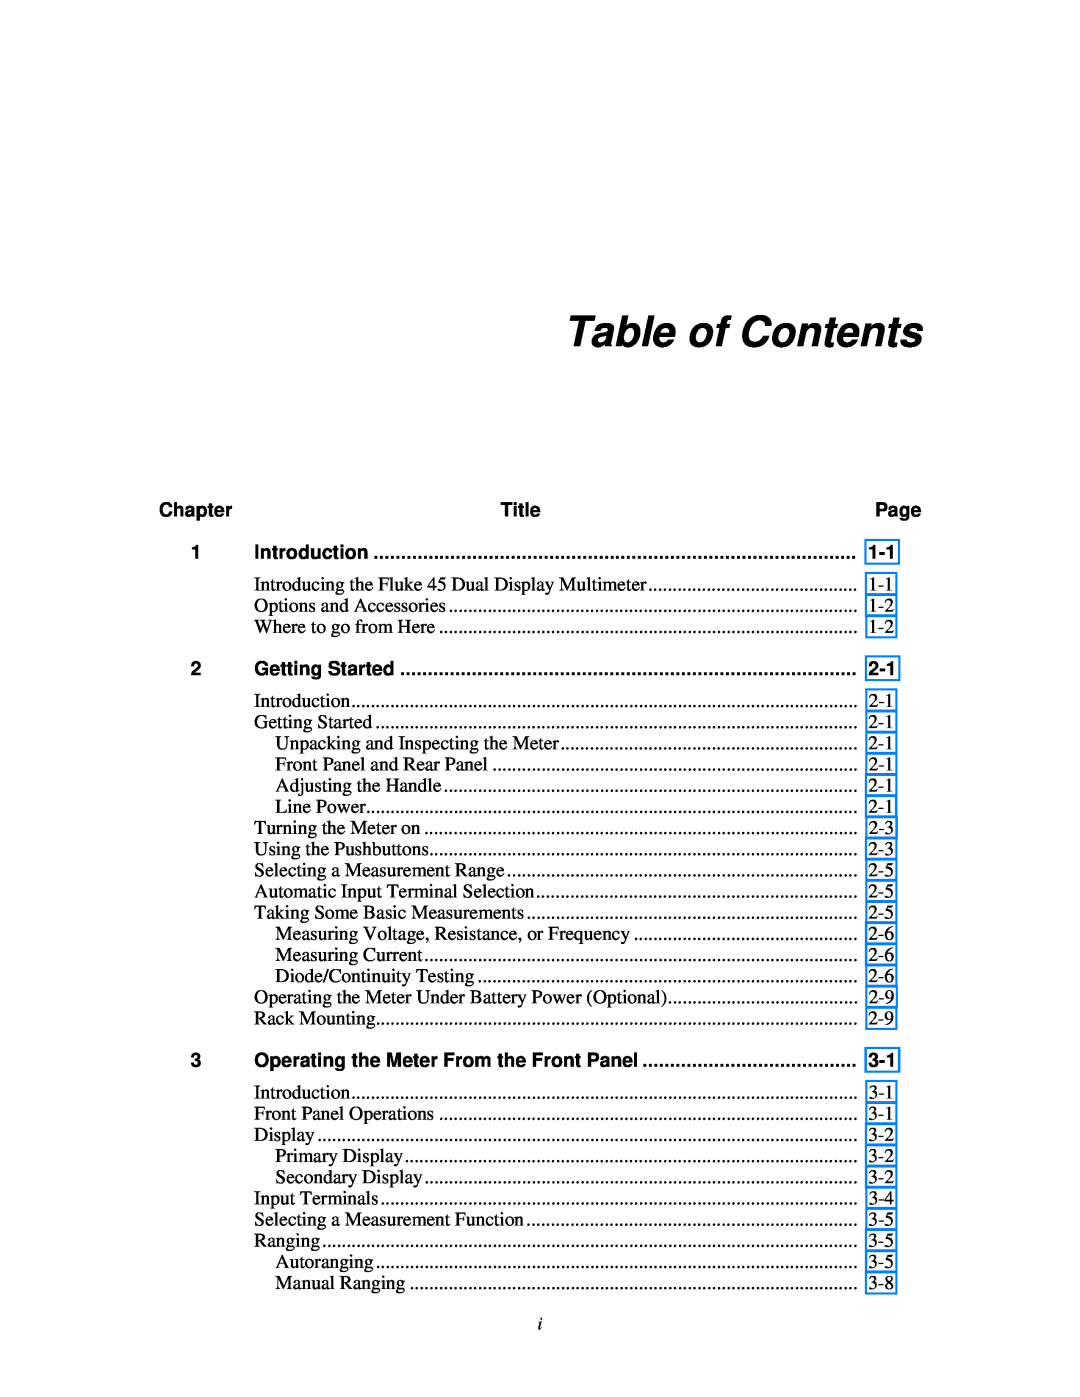 Fluke 45 user manual Table of Contents, Title, Introduction, Getting Started 